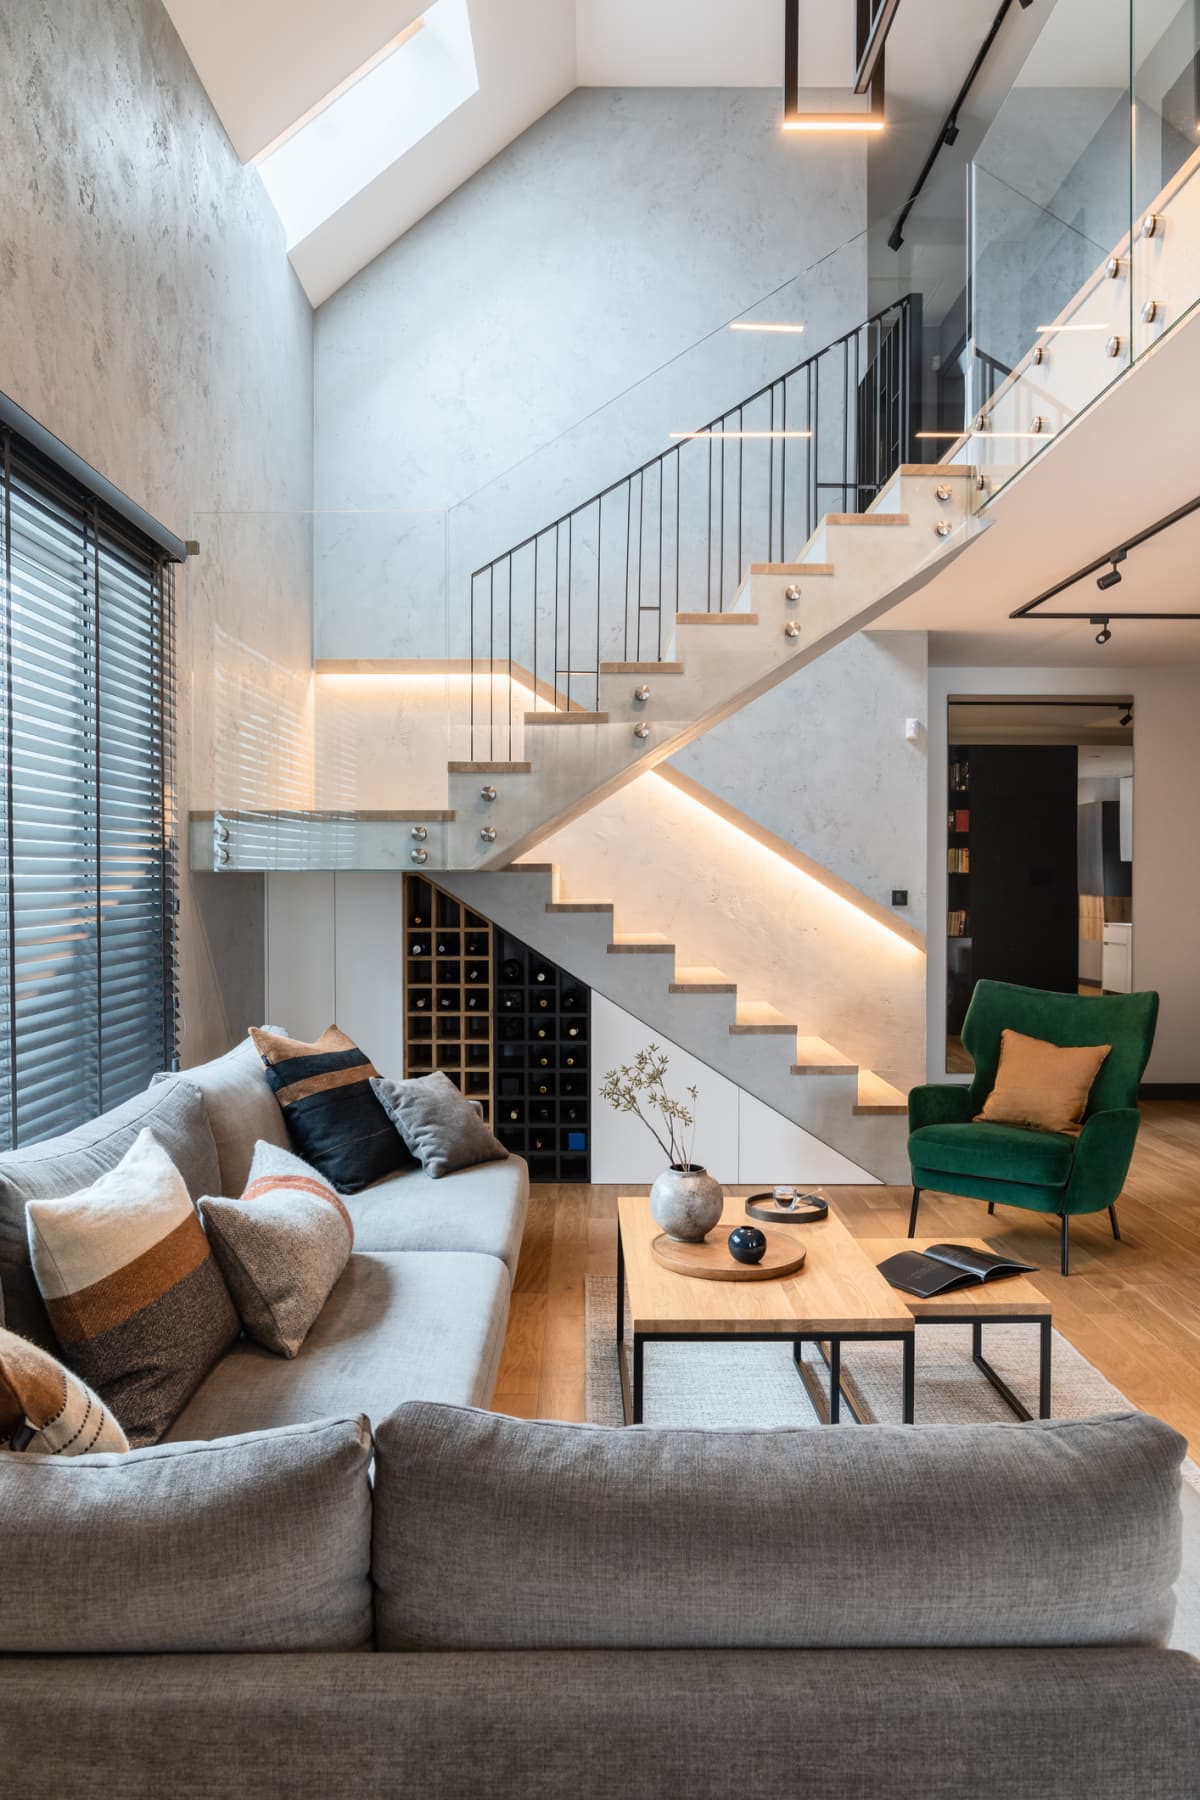 Stylish composition of stairs in living room interior, along with grey sofa, green velvet armchair, coffee table and minimalist personal accessories